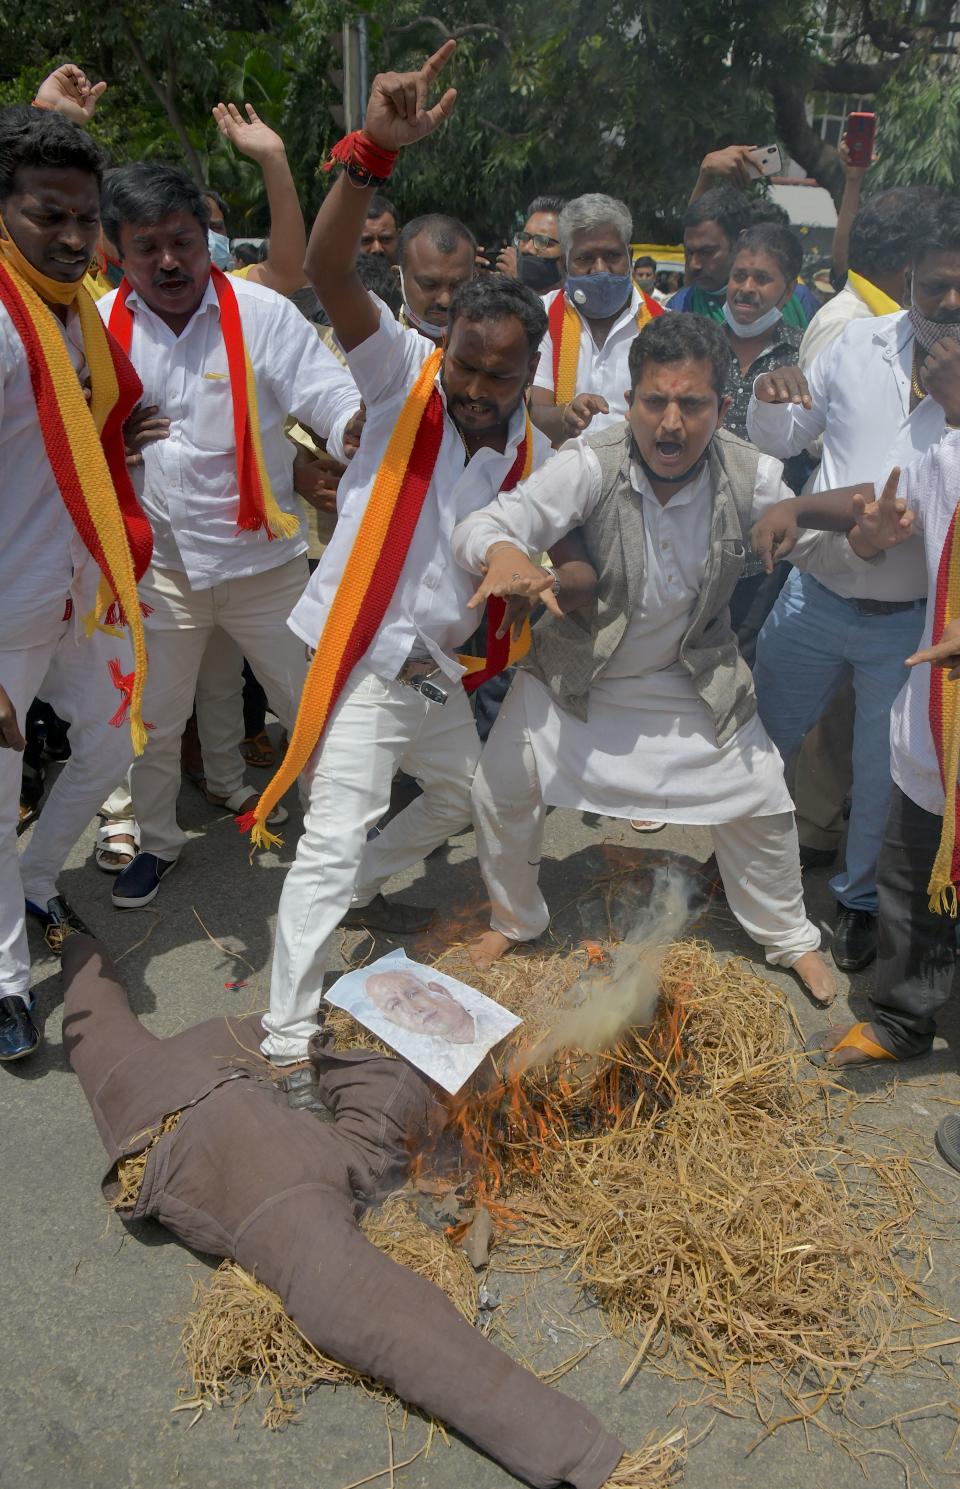 Activists belonging to various farmers rights organisations burn the effigy of Karnataka Chief Minister B. S. Yediyurappa during an anti-government demonstration to protest against the recent passing of new farm bills in parliament, in Bangalore on September 28, 2020. (Photo by Manjunath Kiran / AFP) (Photo by MANJUNATH KIRAN/AFP via Getty Images)